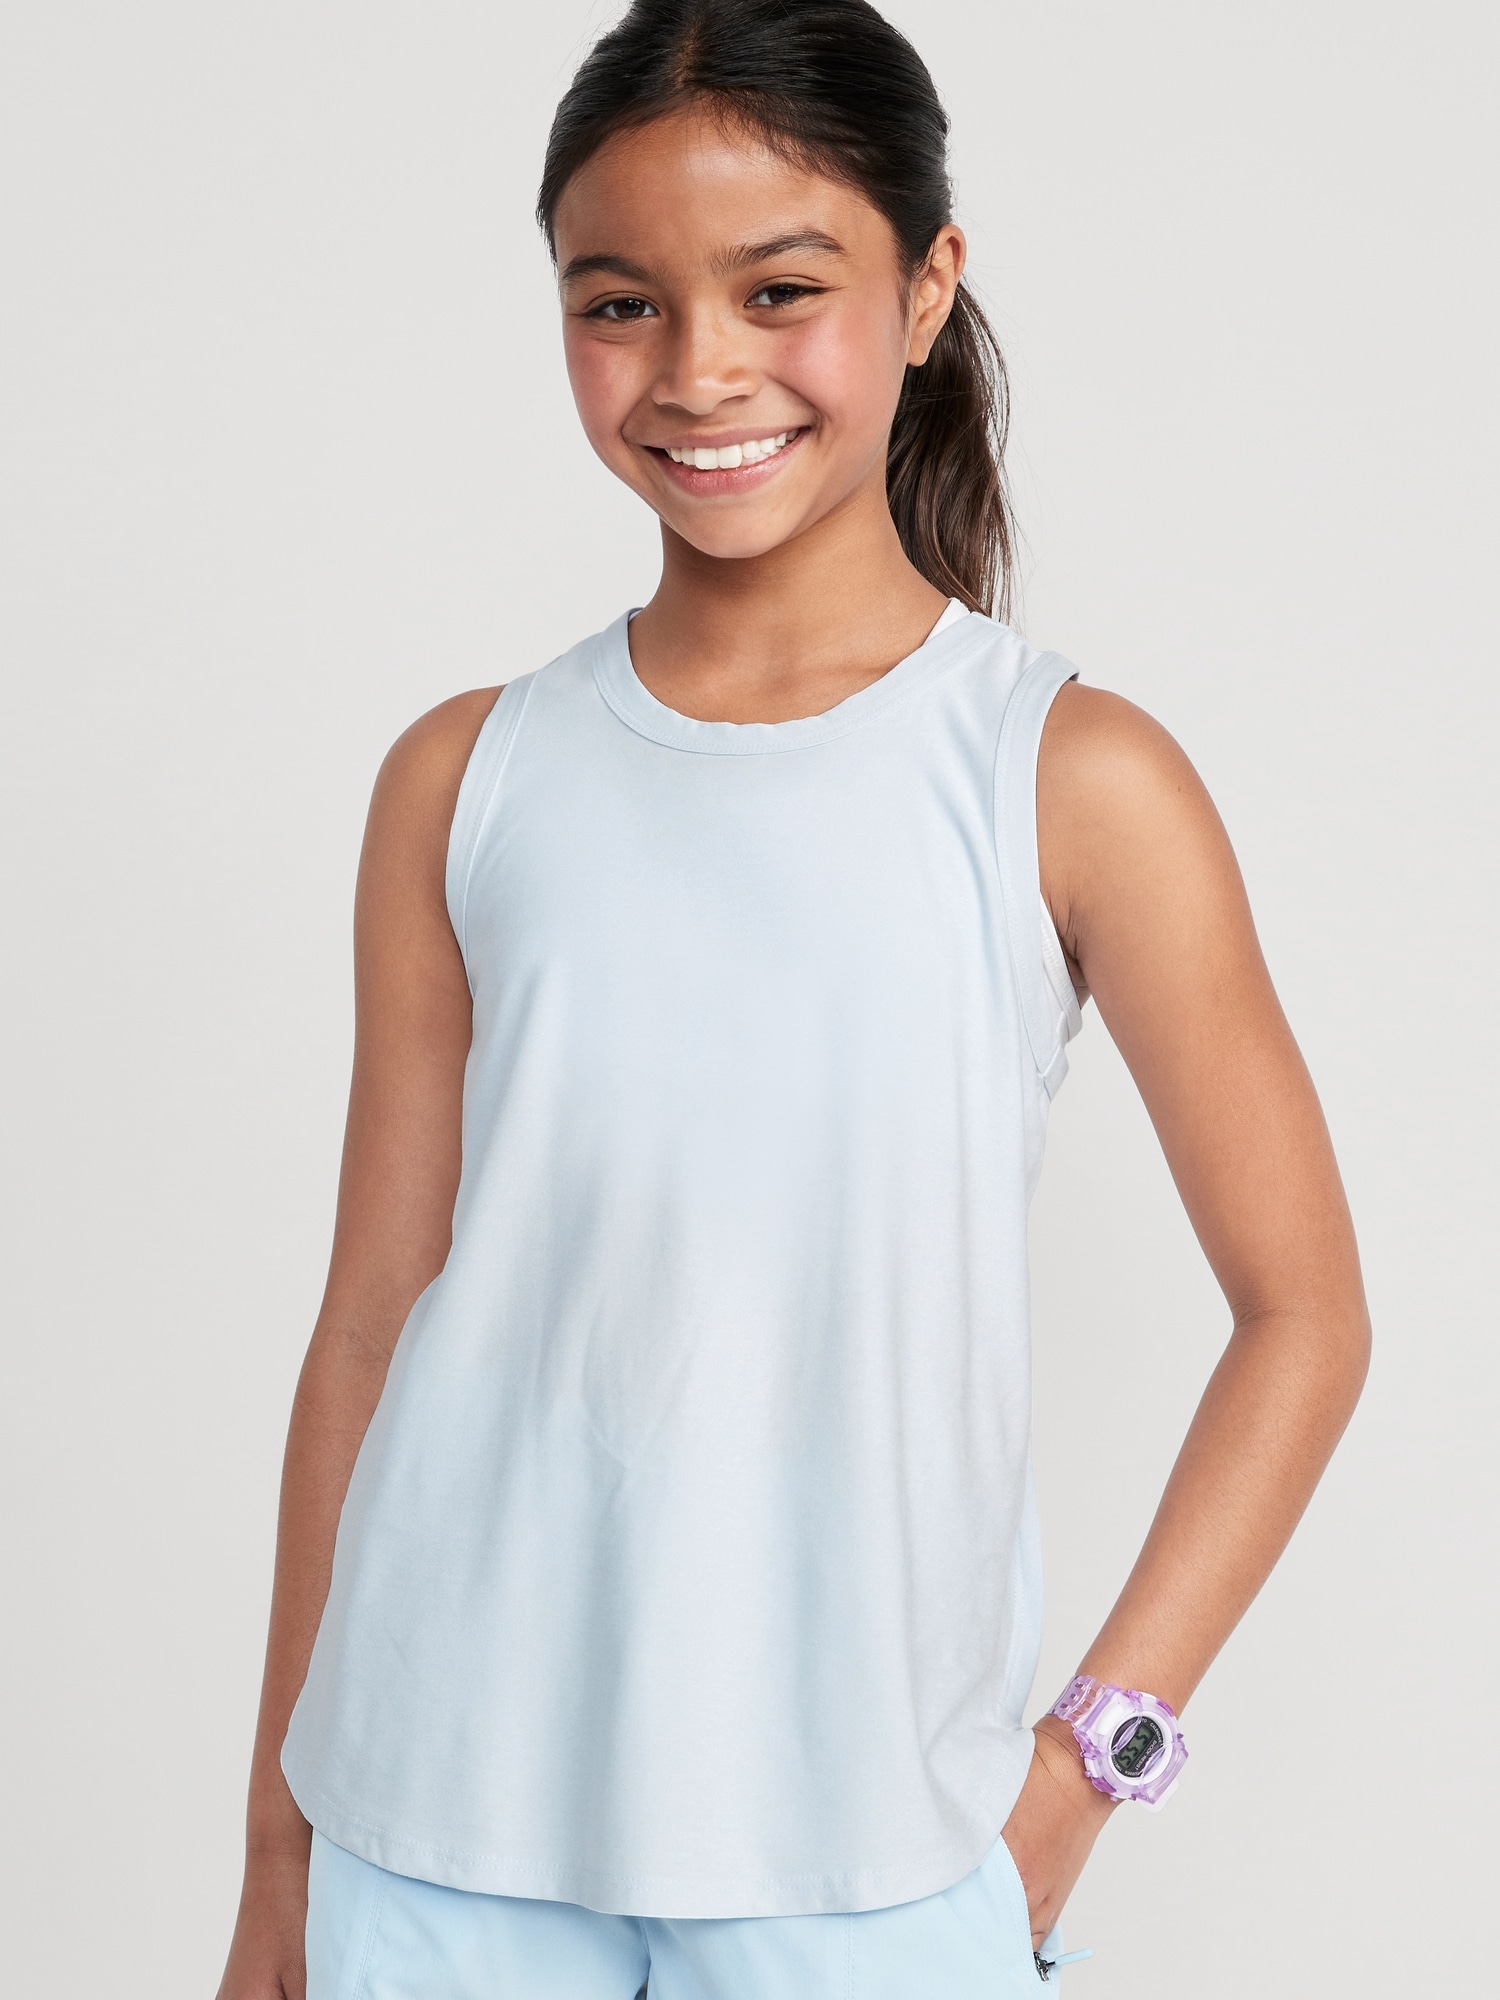 Cloud 94 Soft Go-Dry Cool Tunic Tank Top for Girls